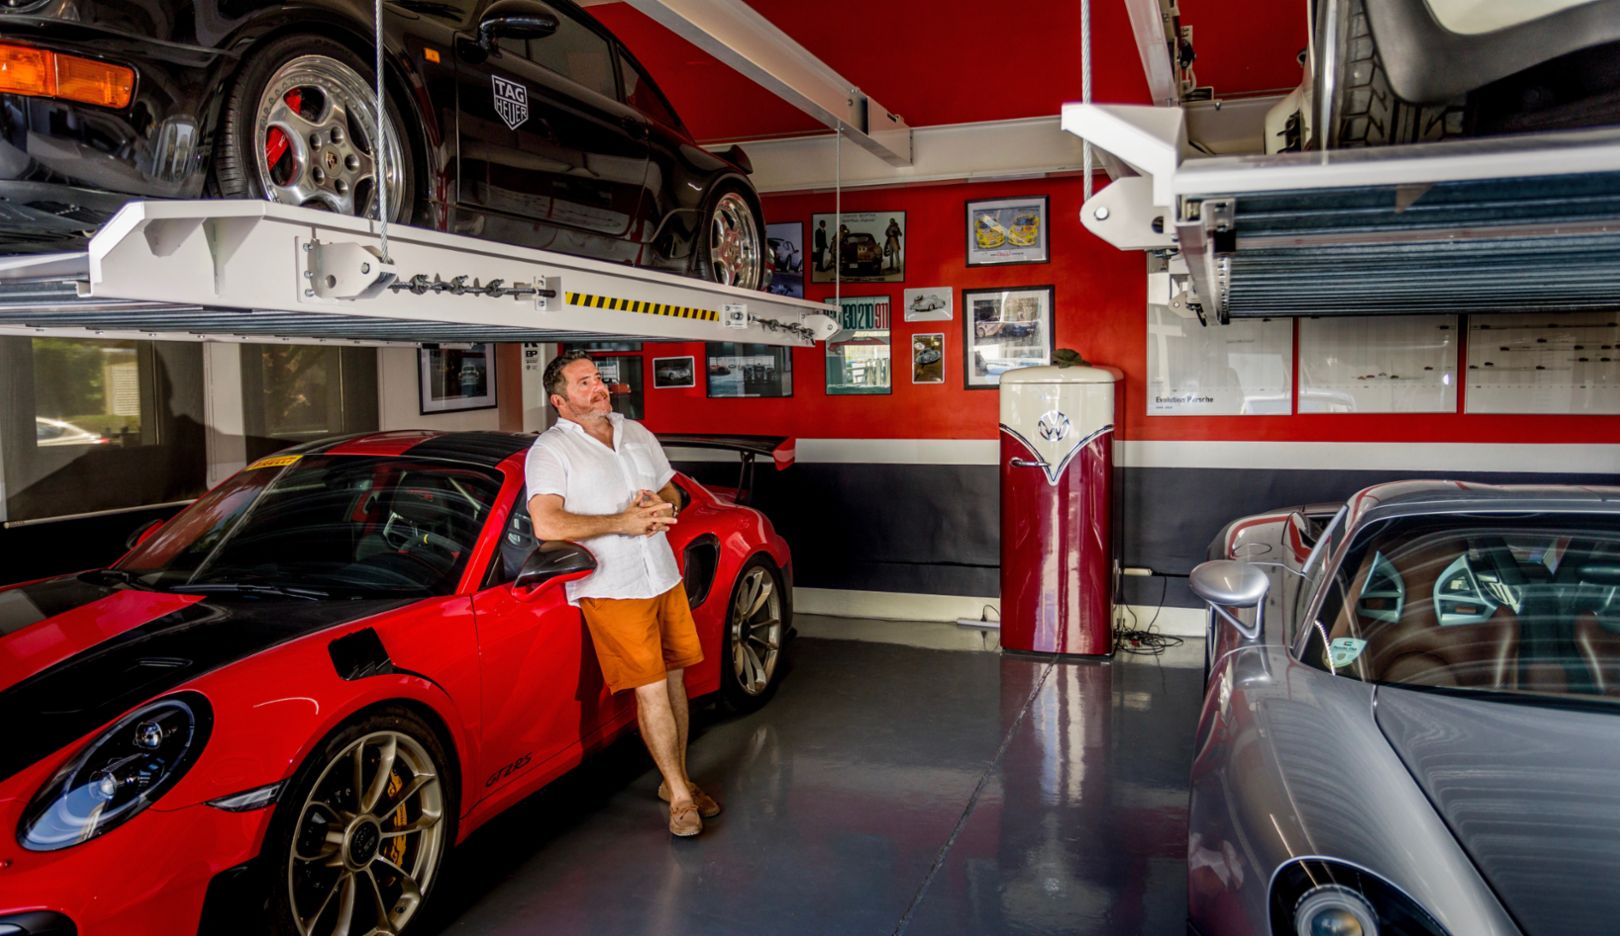 Karim Al Azhari’s collection comprises a total of 18 sports cars from Zuffenhausen. His exclusive garage is a must-see place for Porsche connoisseurs.